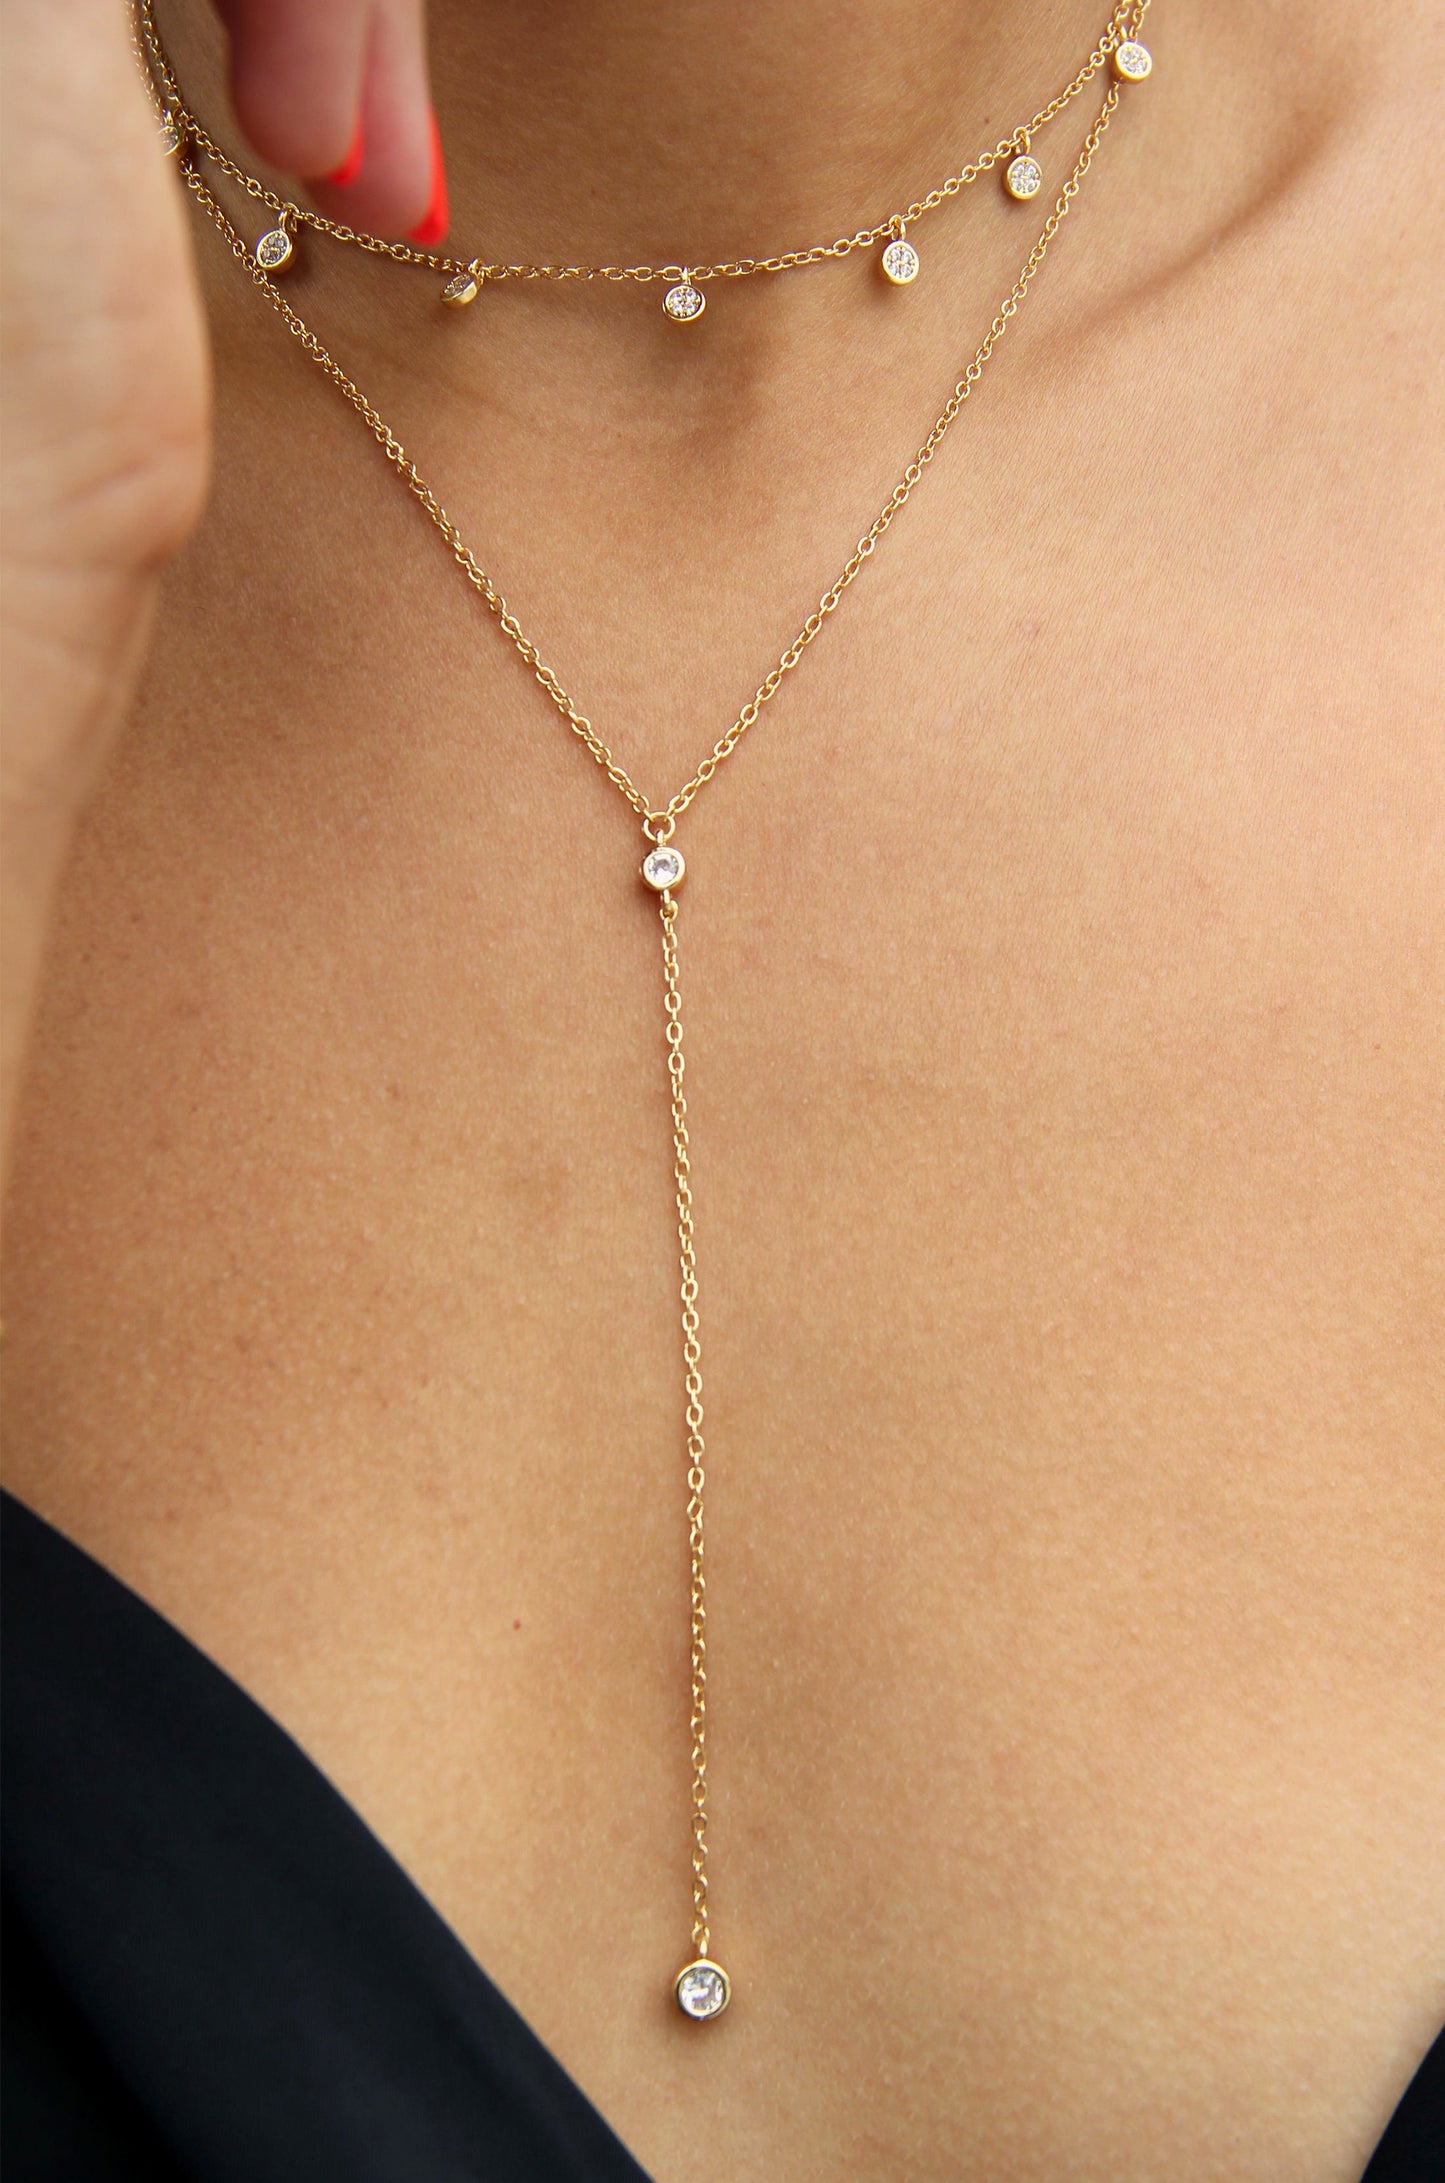 Simplistic Crystal Layered 18k Gold Plated Lariat Necklace Set shown on a model  